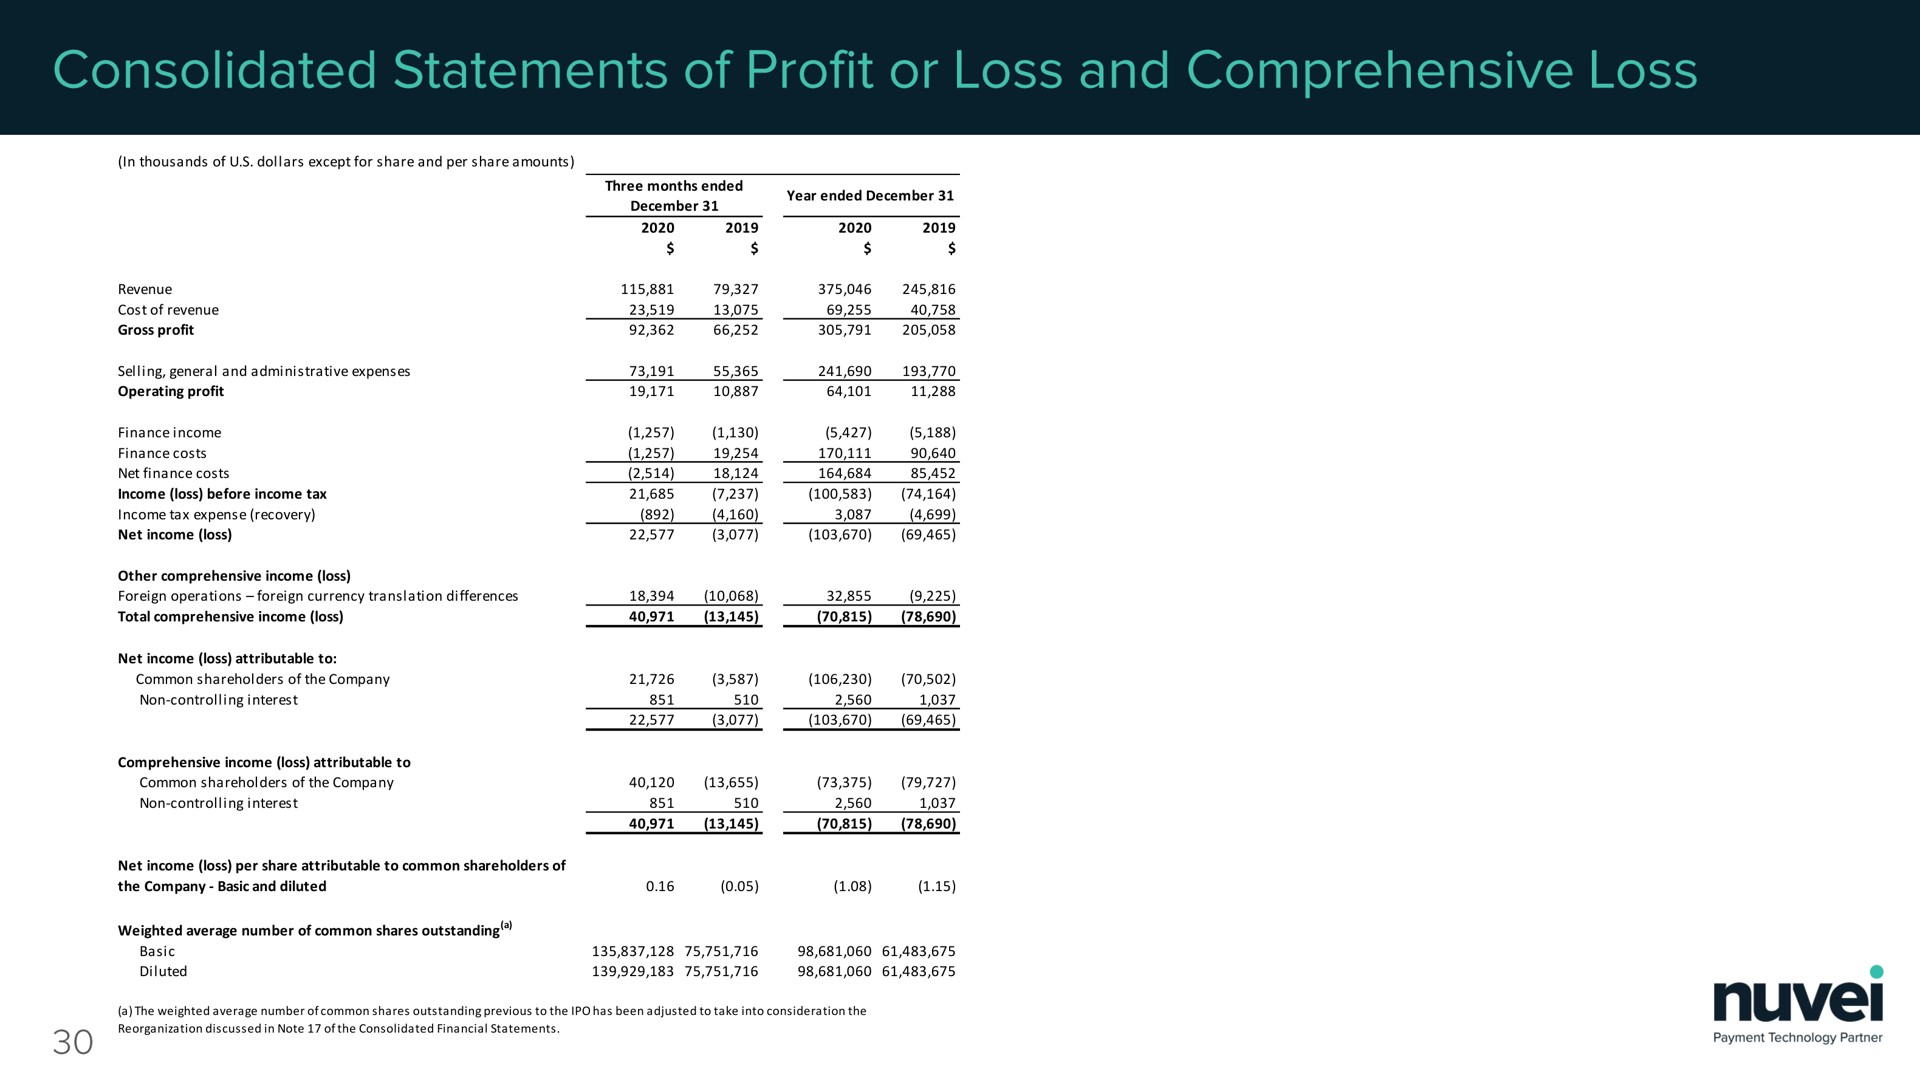 consolidated statements of profit or loss and comprehensive loss | Nuvei